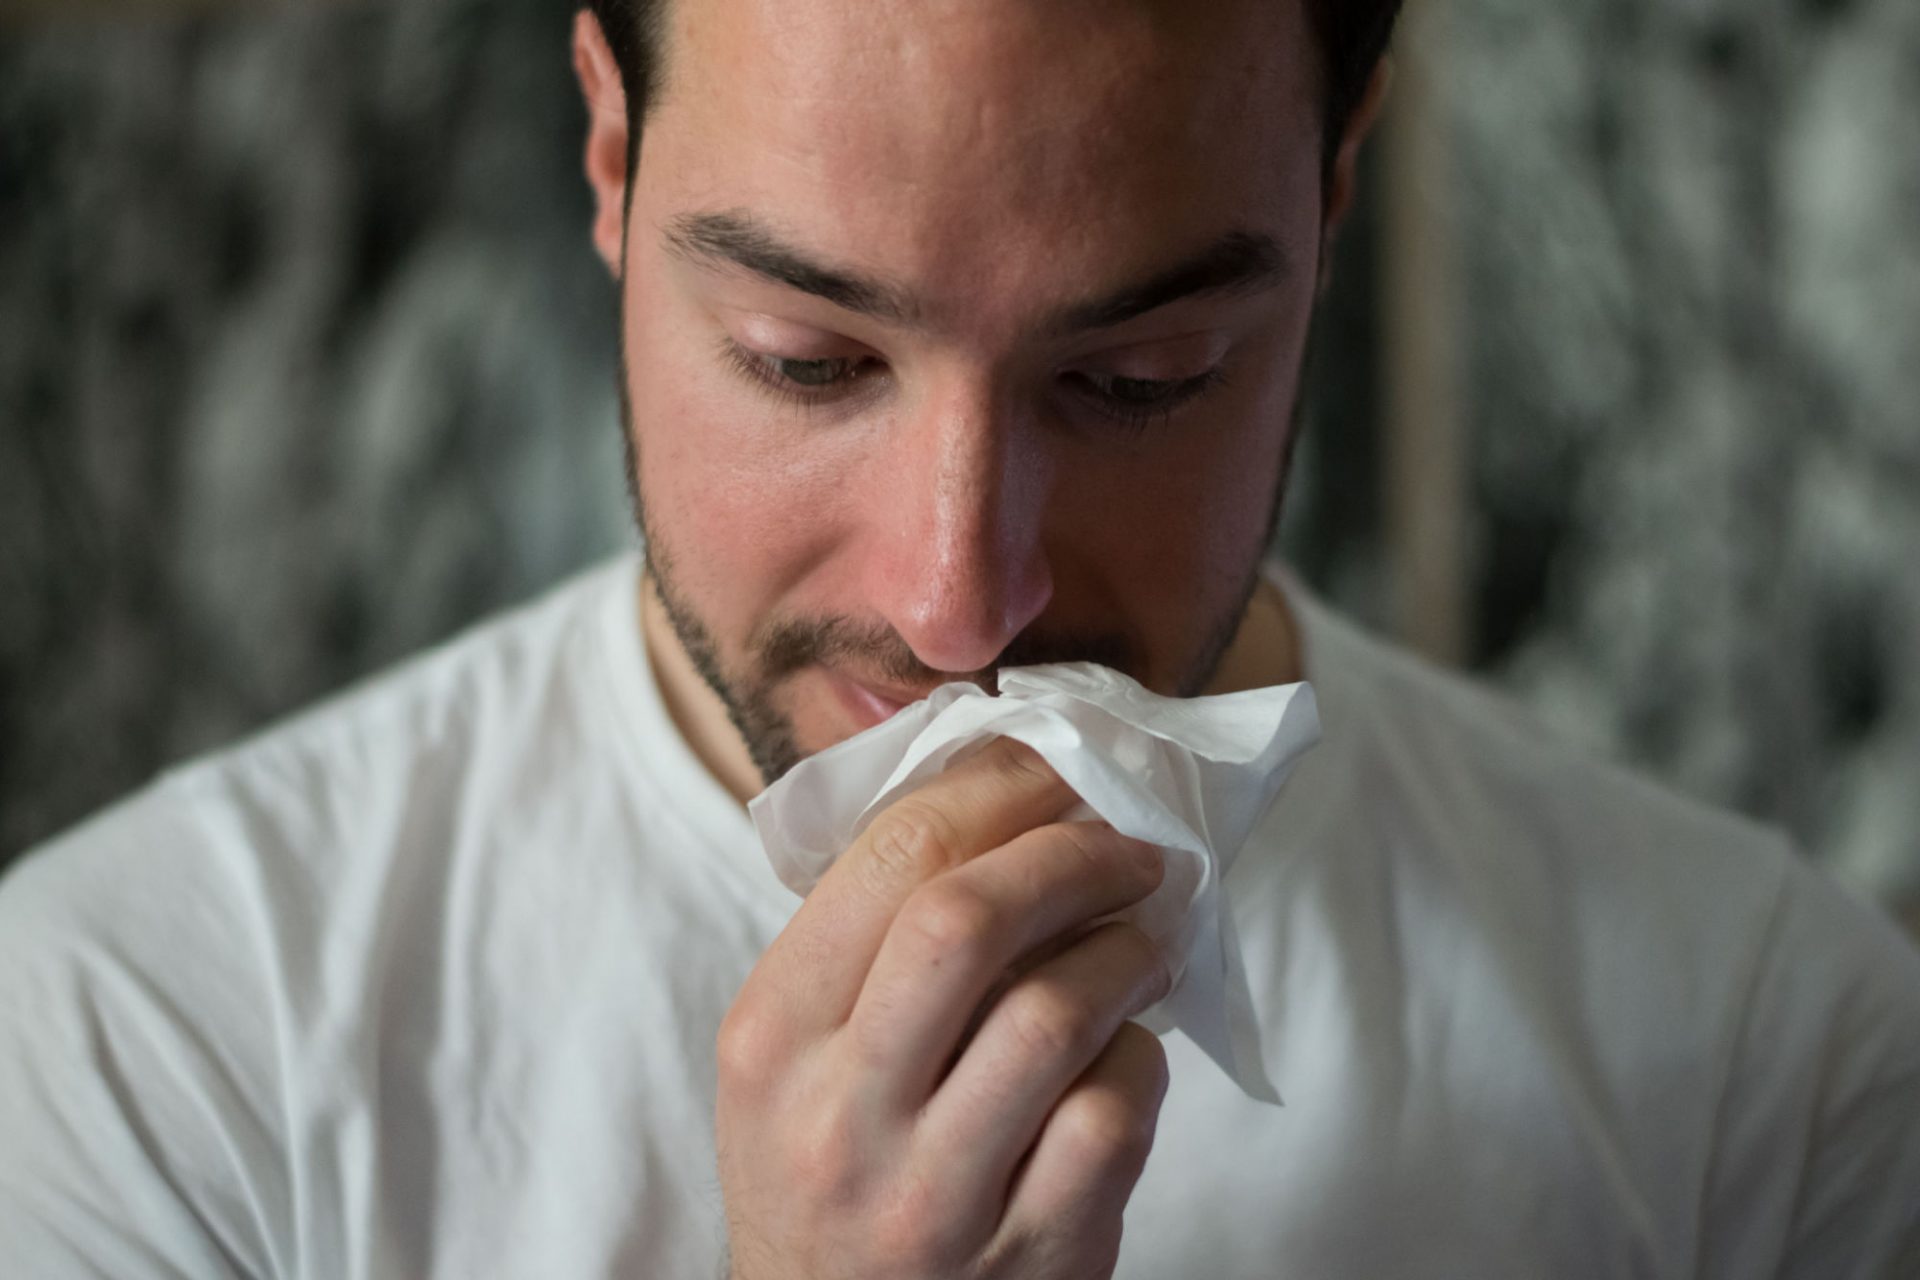 Man wiping his nose with a tissue.